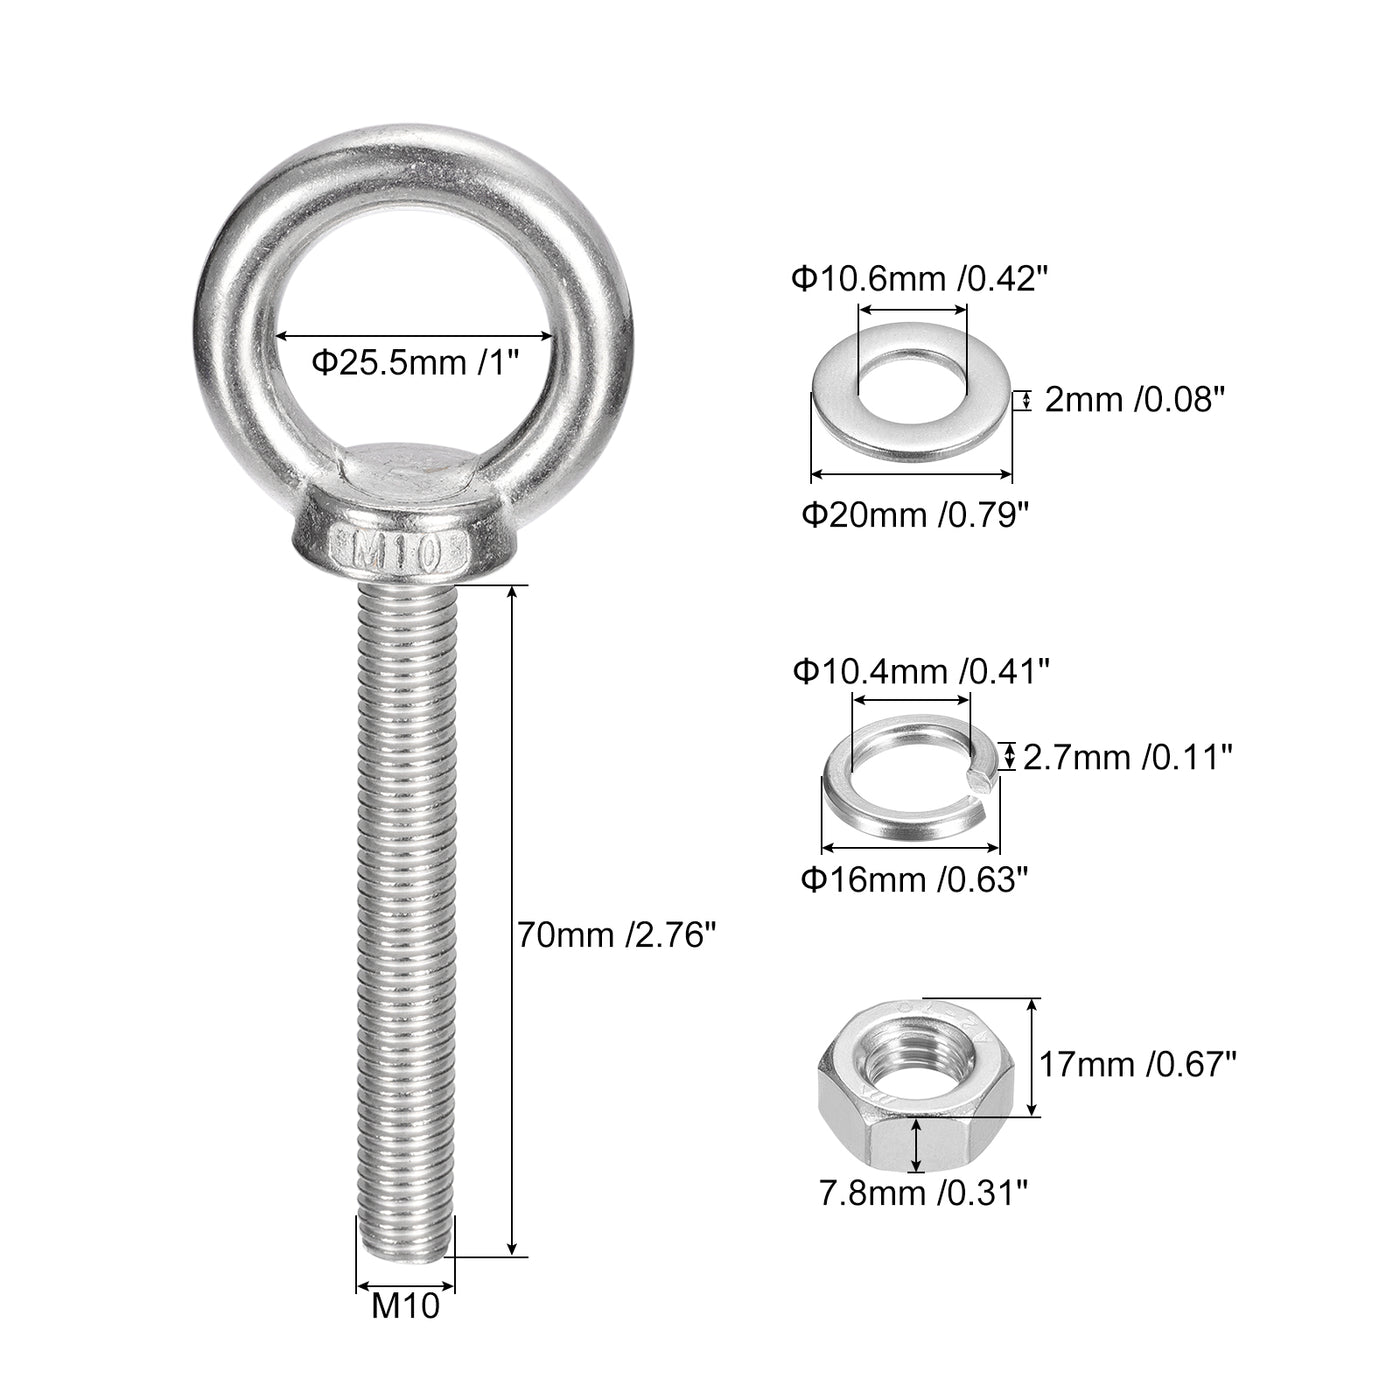 uxcell Uxcell Lifting Eye Bolt, 2 Sets M10x70mm Eye Bolt with Nut Washer 304 Stainless Steel